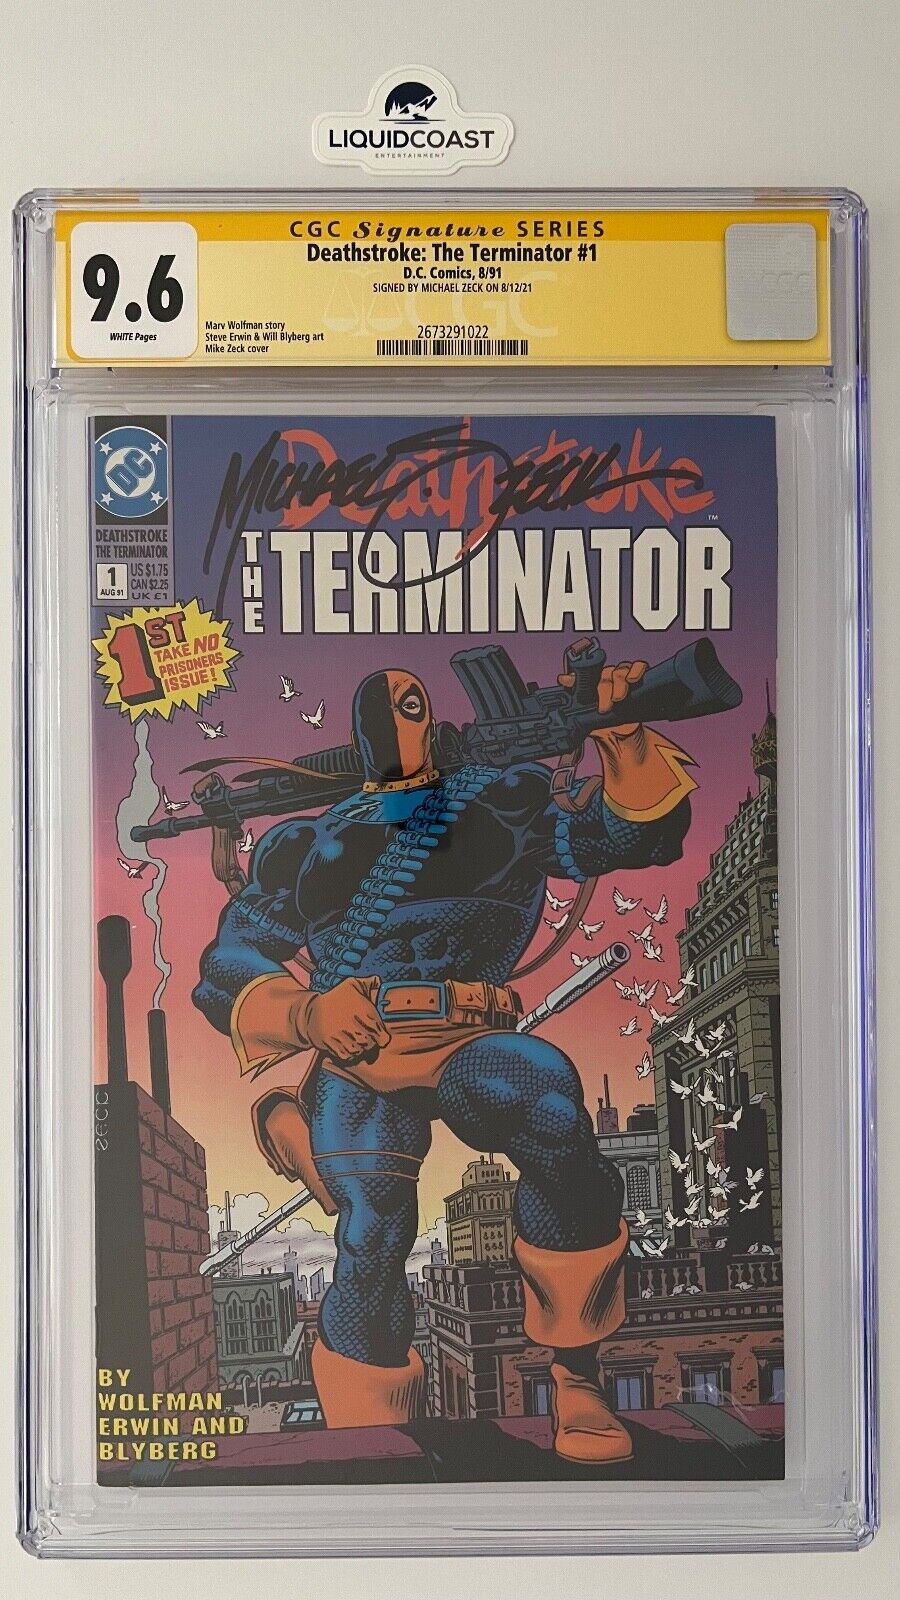 Deathstroke: The Terminator #1 SS CGC 9.6 signed by Michael Zeck